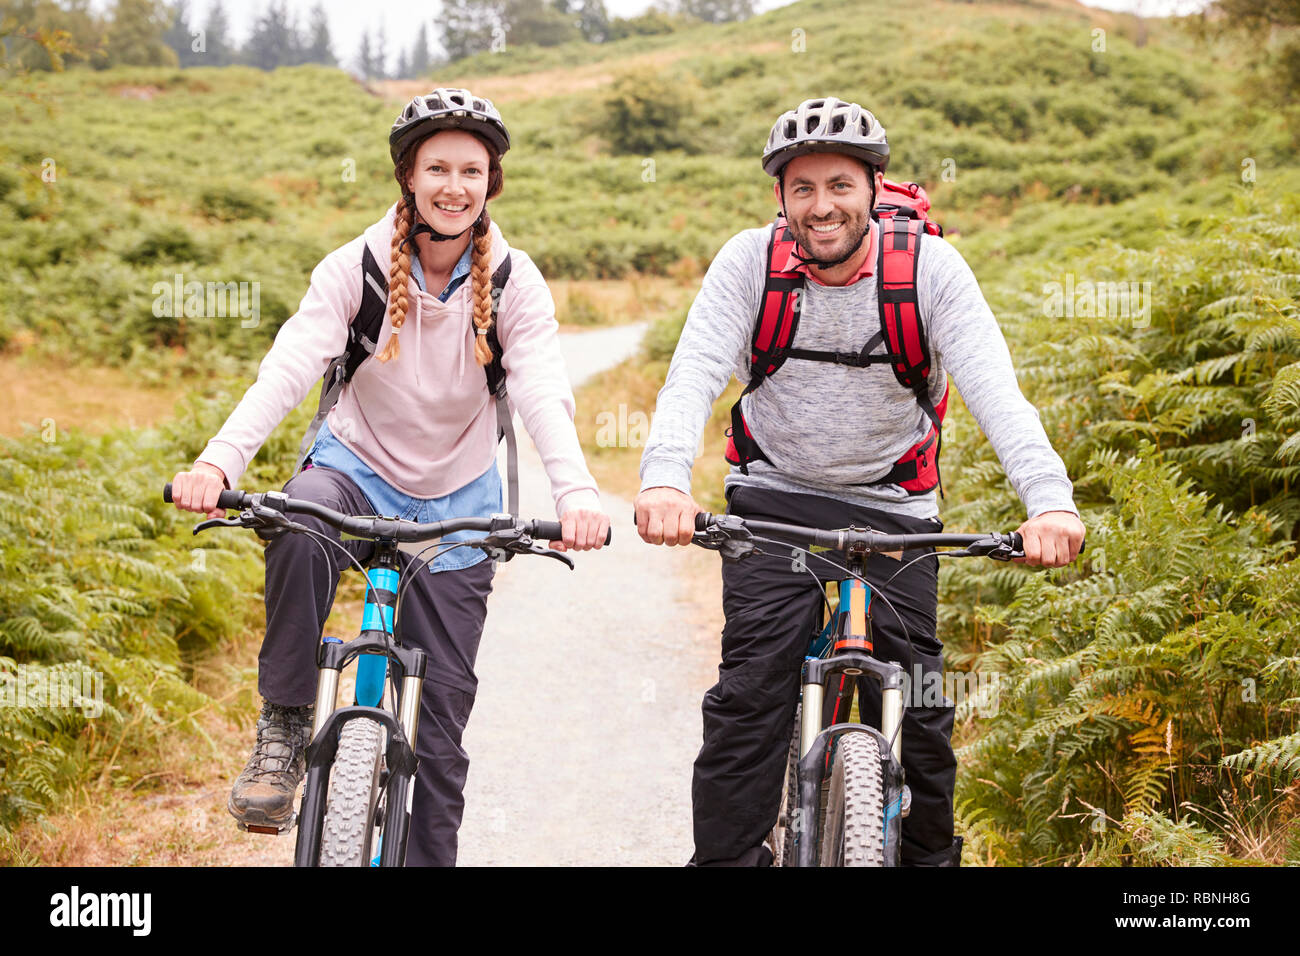 Young adult couple riding mountain bikes in a country lane, looking at camera, close up Stock Photo